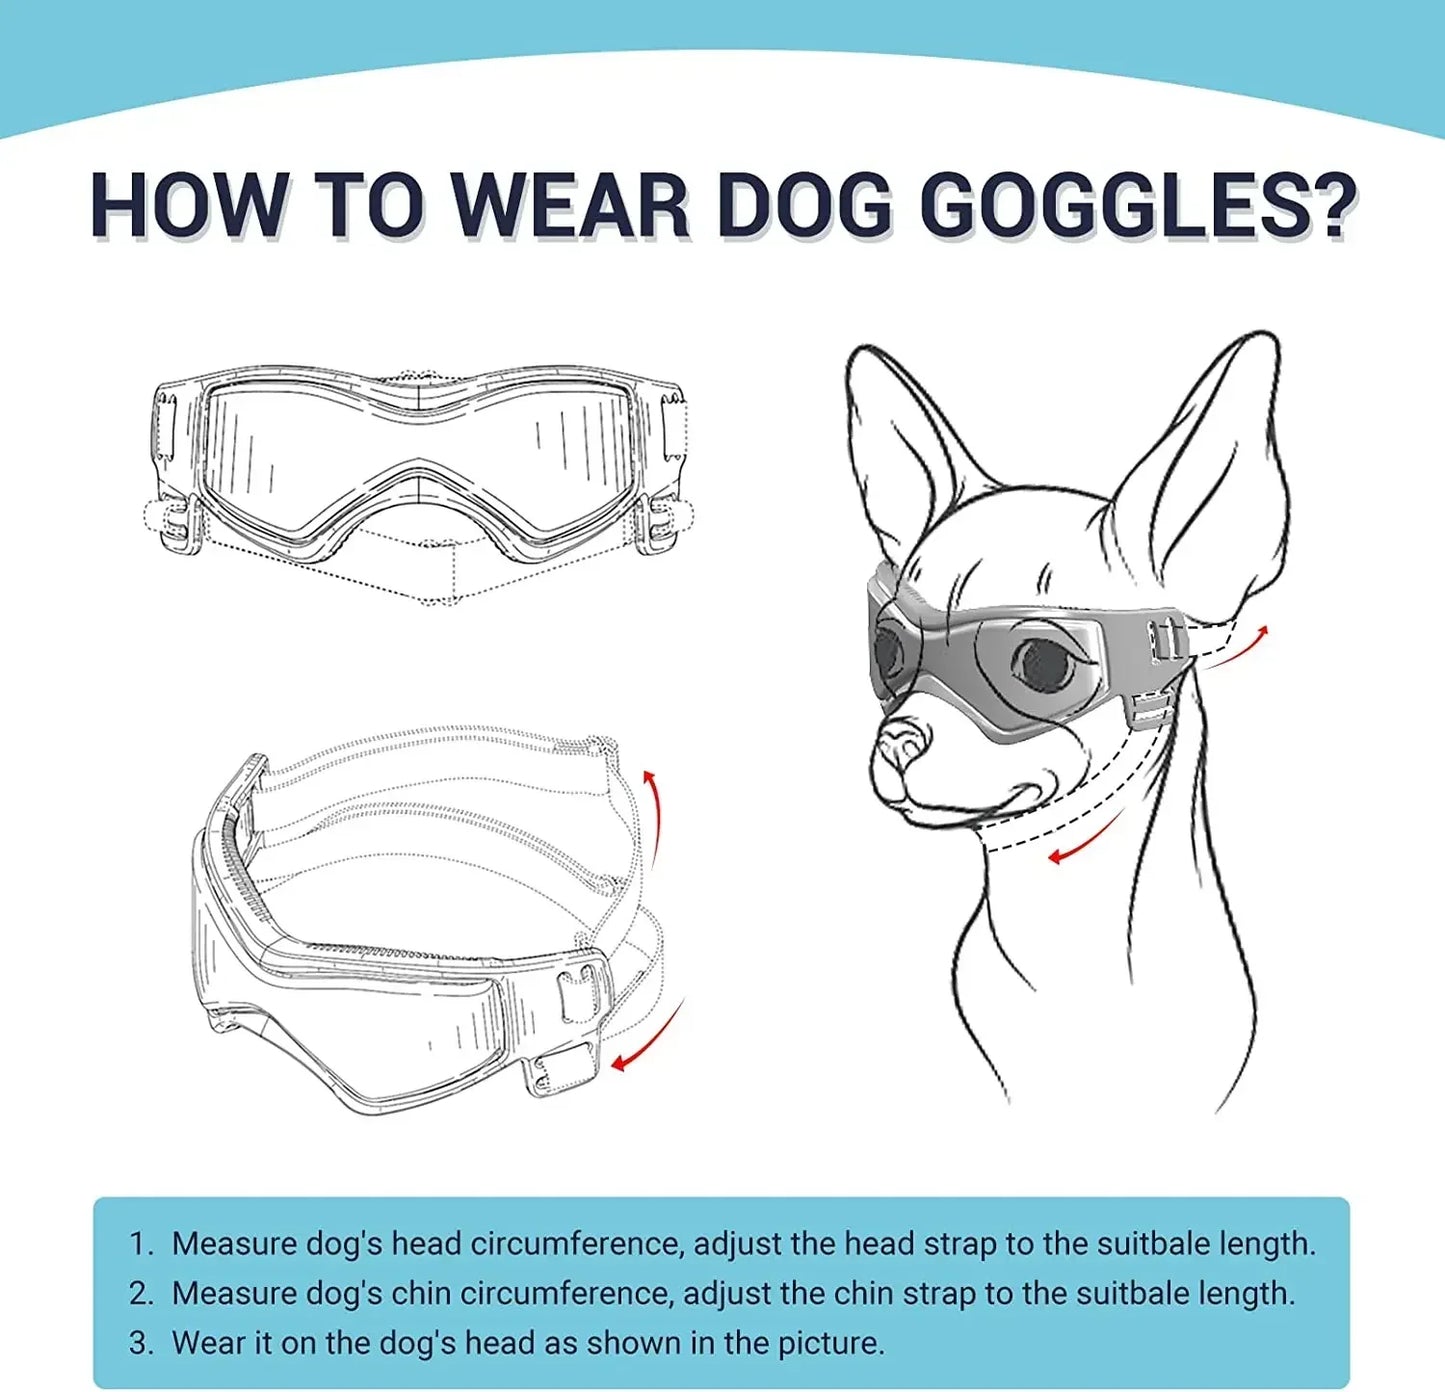 Protective Glasses for Dogs